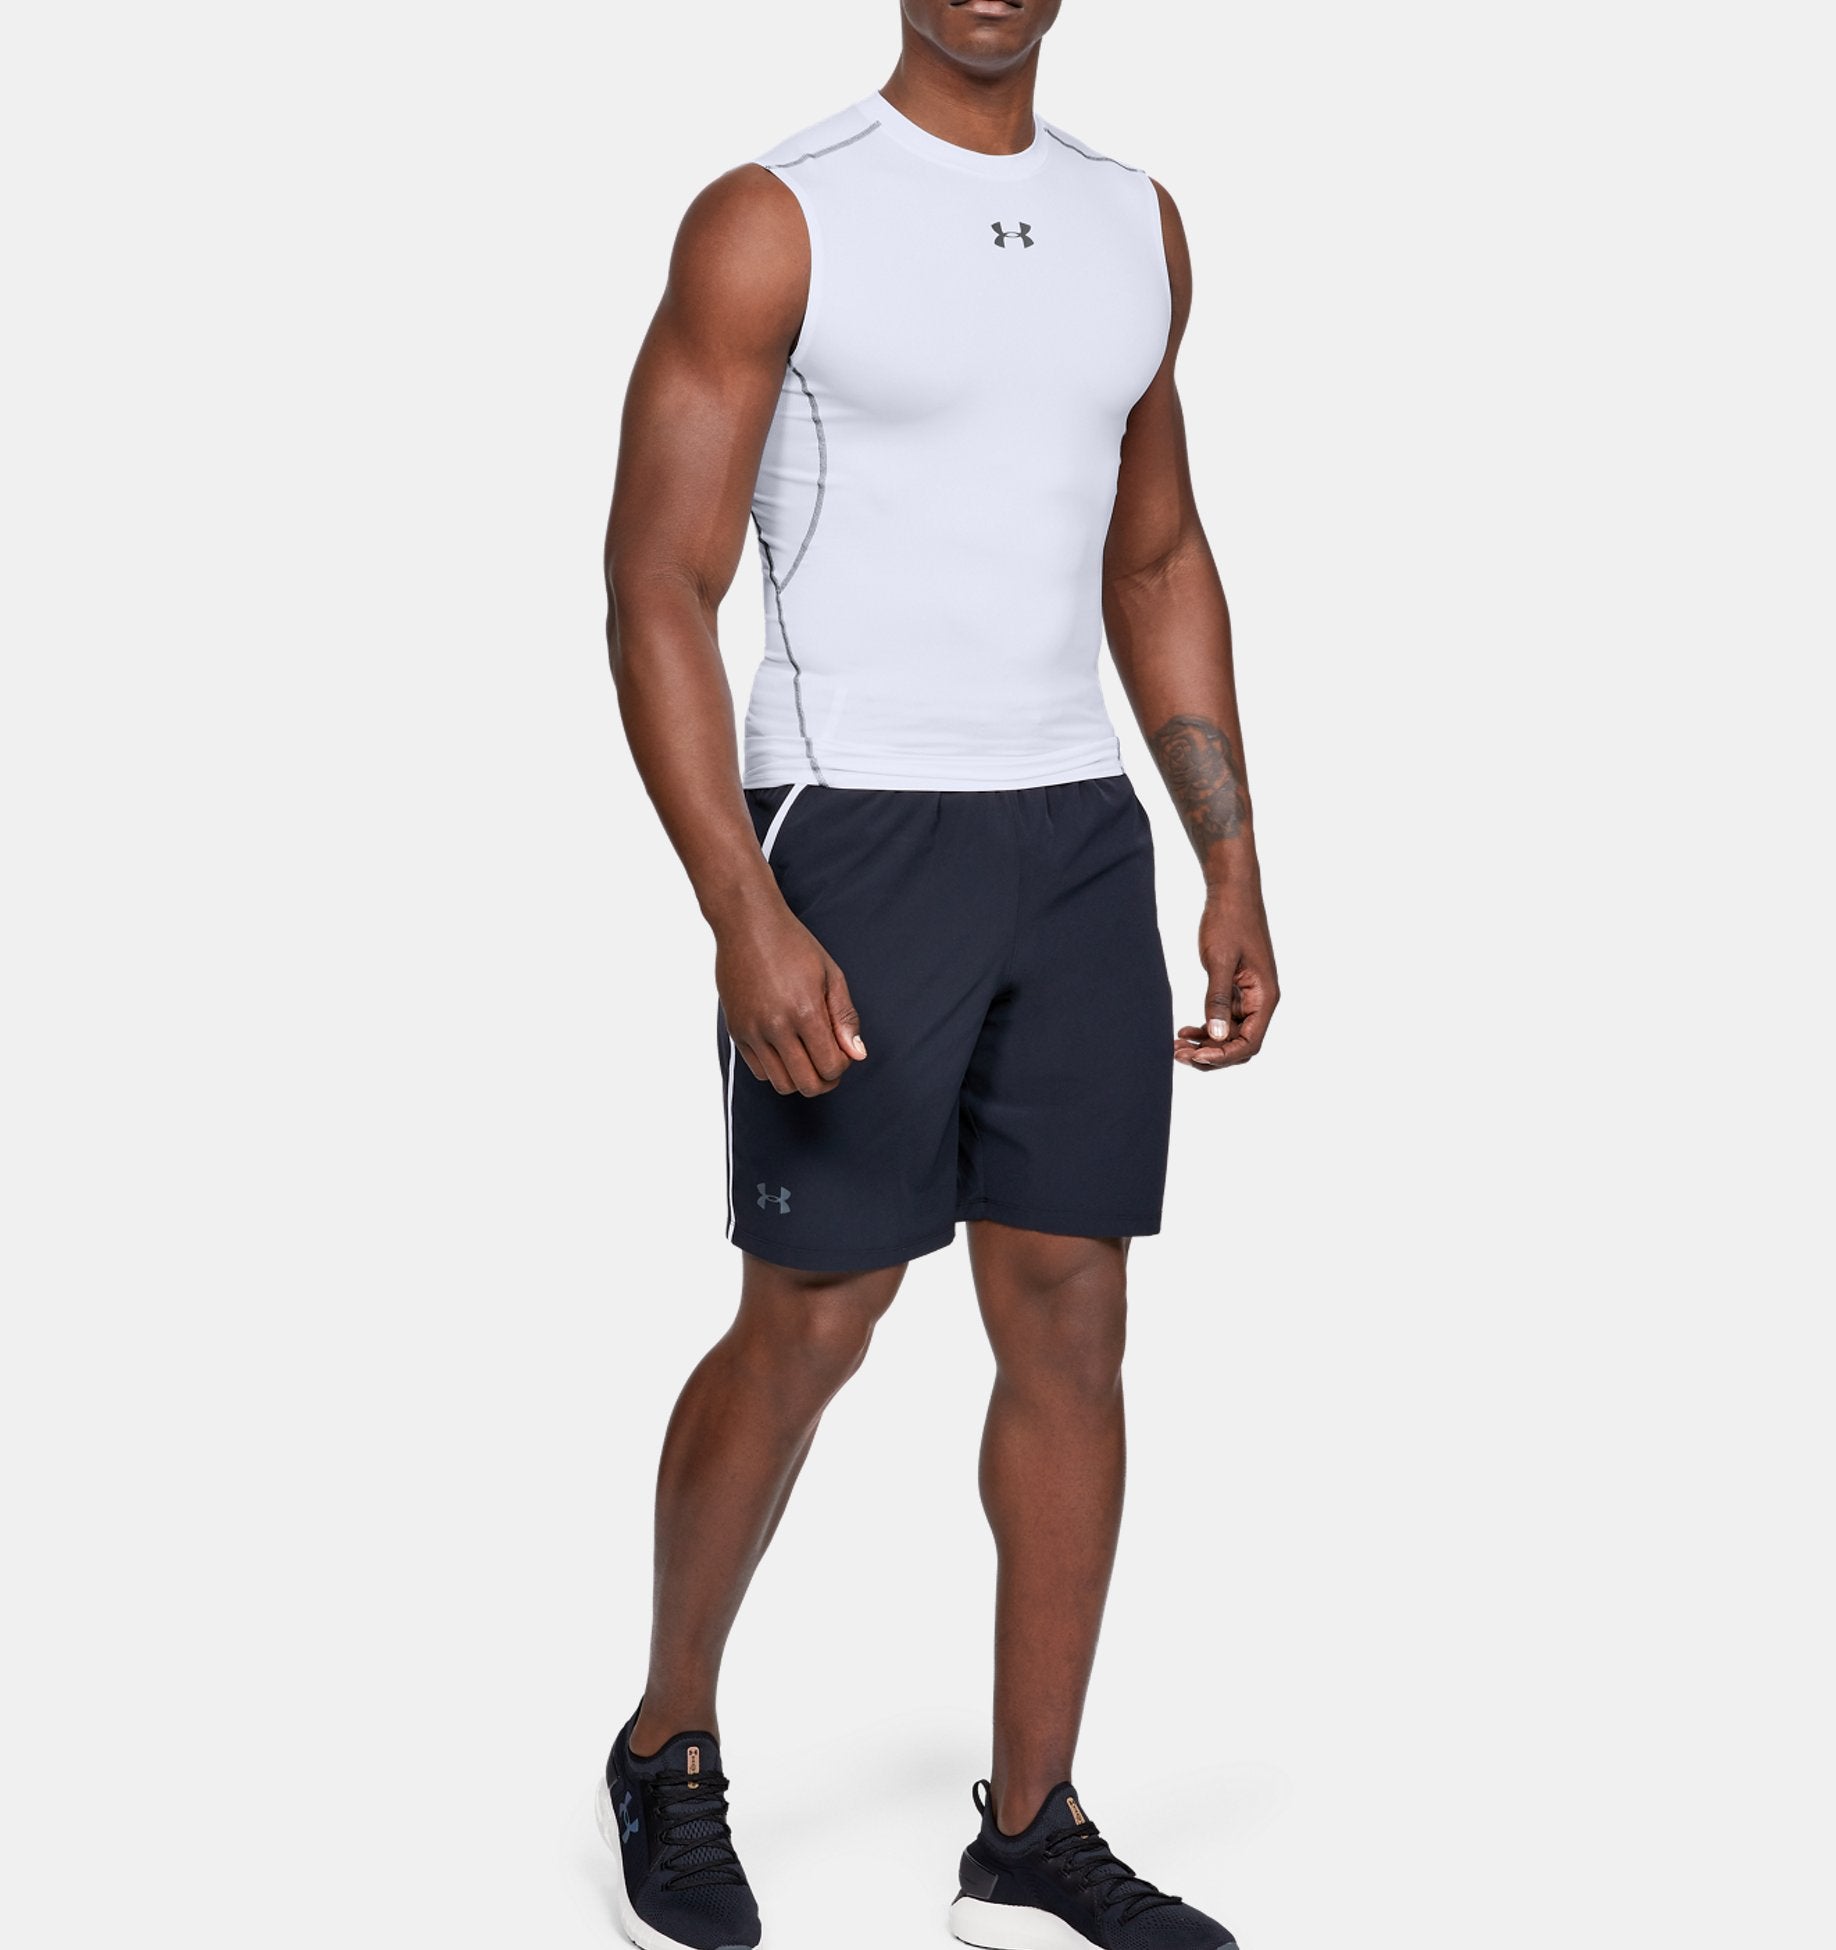 Under Armour HeatGear Armour Mens Sleeveless Compression Top - White